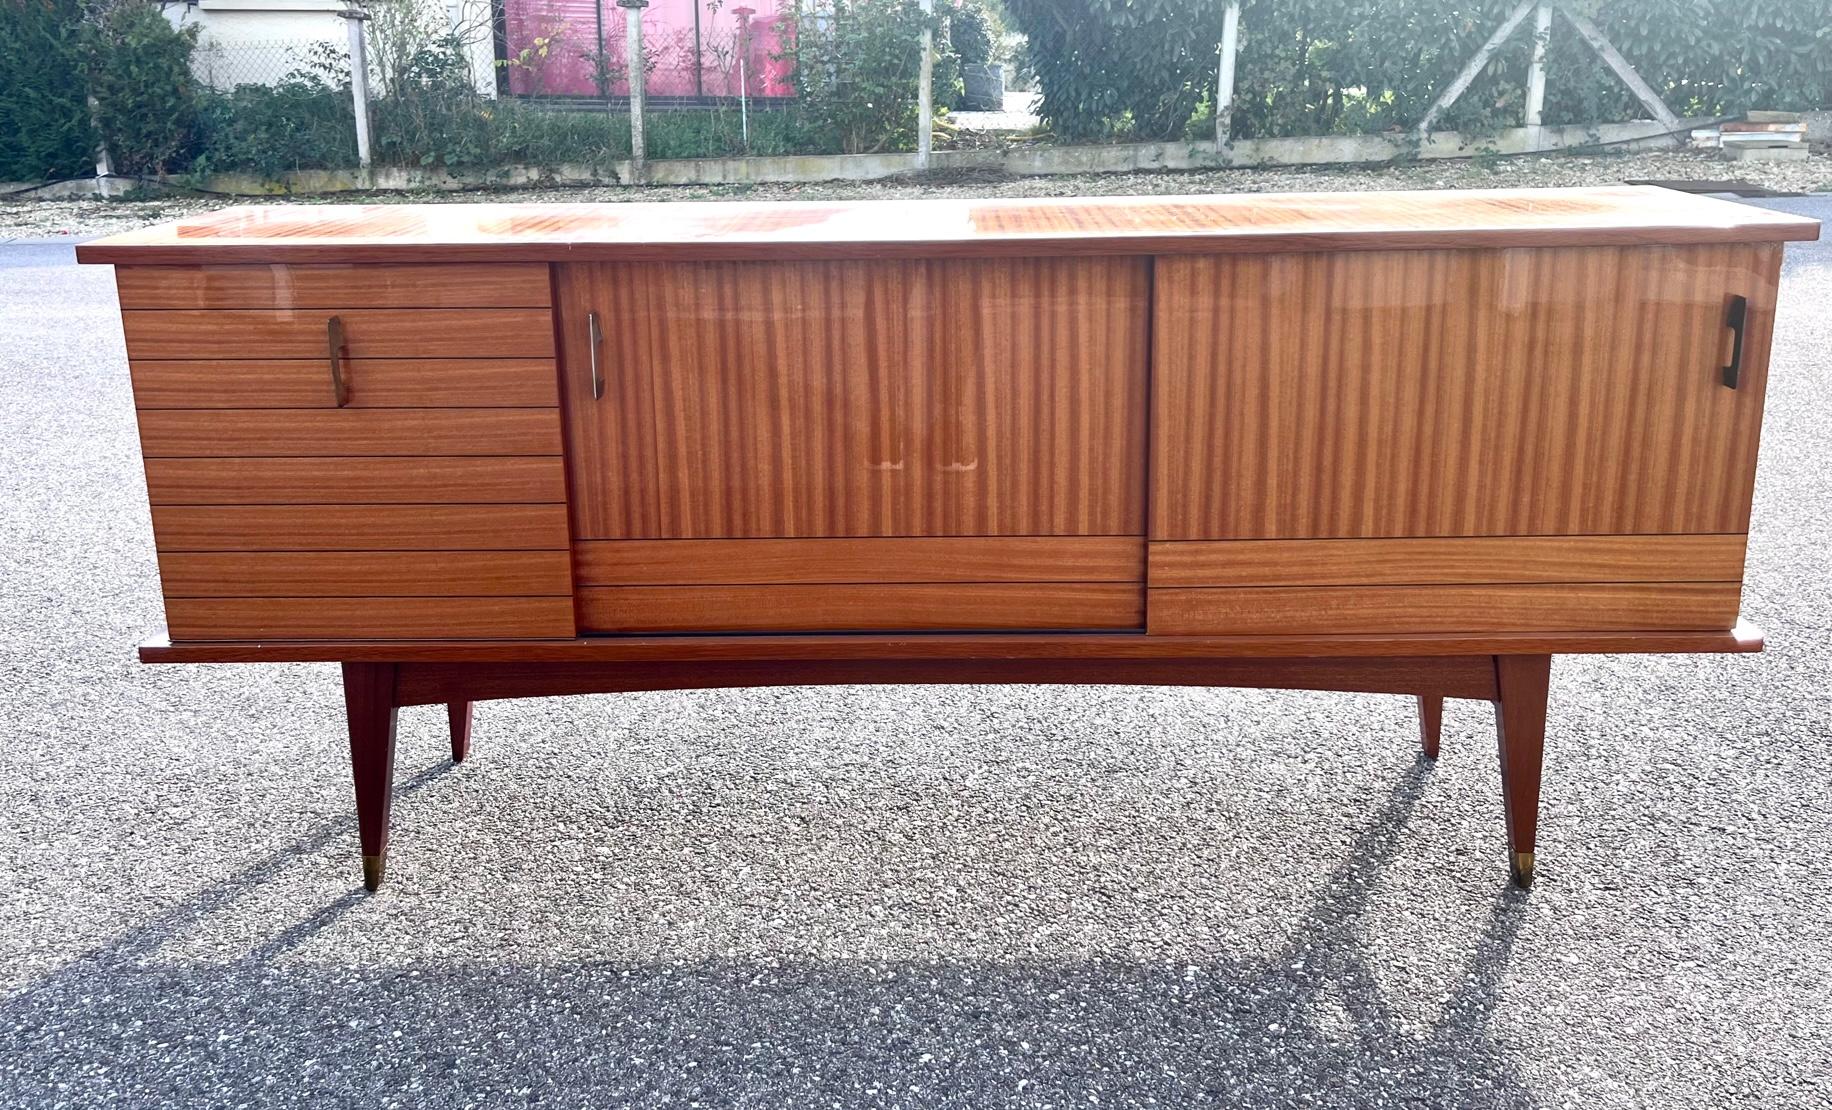 Beautiful cabinet from the 1960's with two sliding doors and one drop down door.
Wood shelves behind the sliding doors and one glass shelf on the left 
Ebonized decor in between the teak veneers giving the piece a very graphic and modern look.